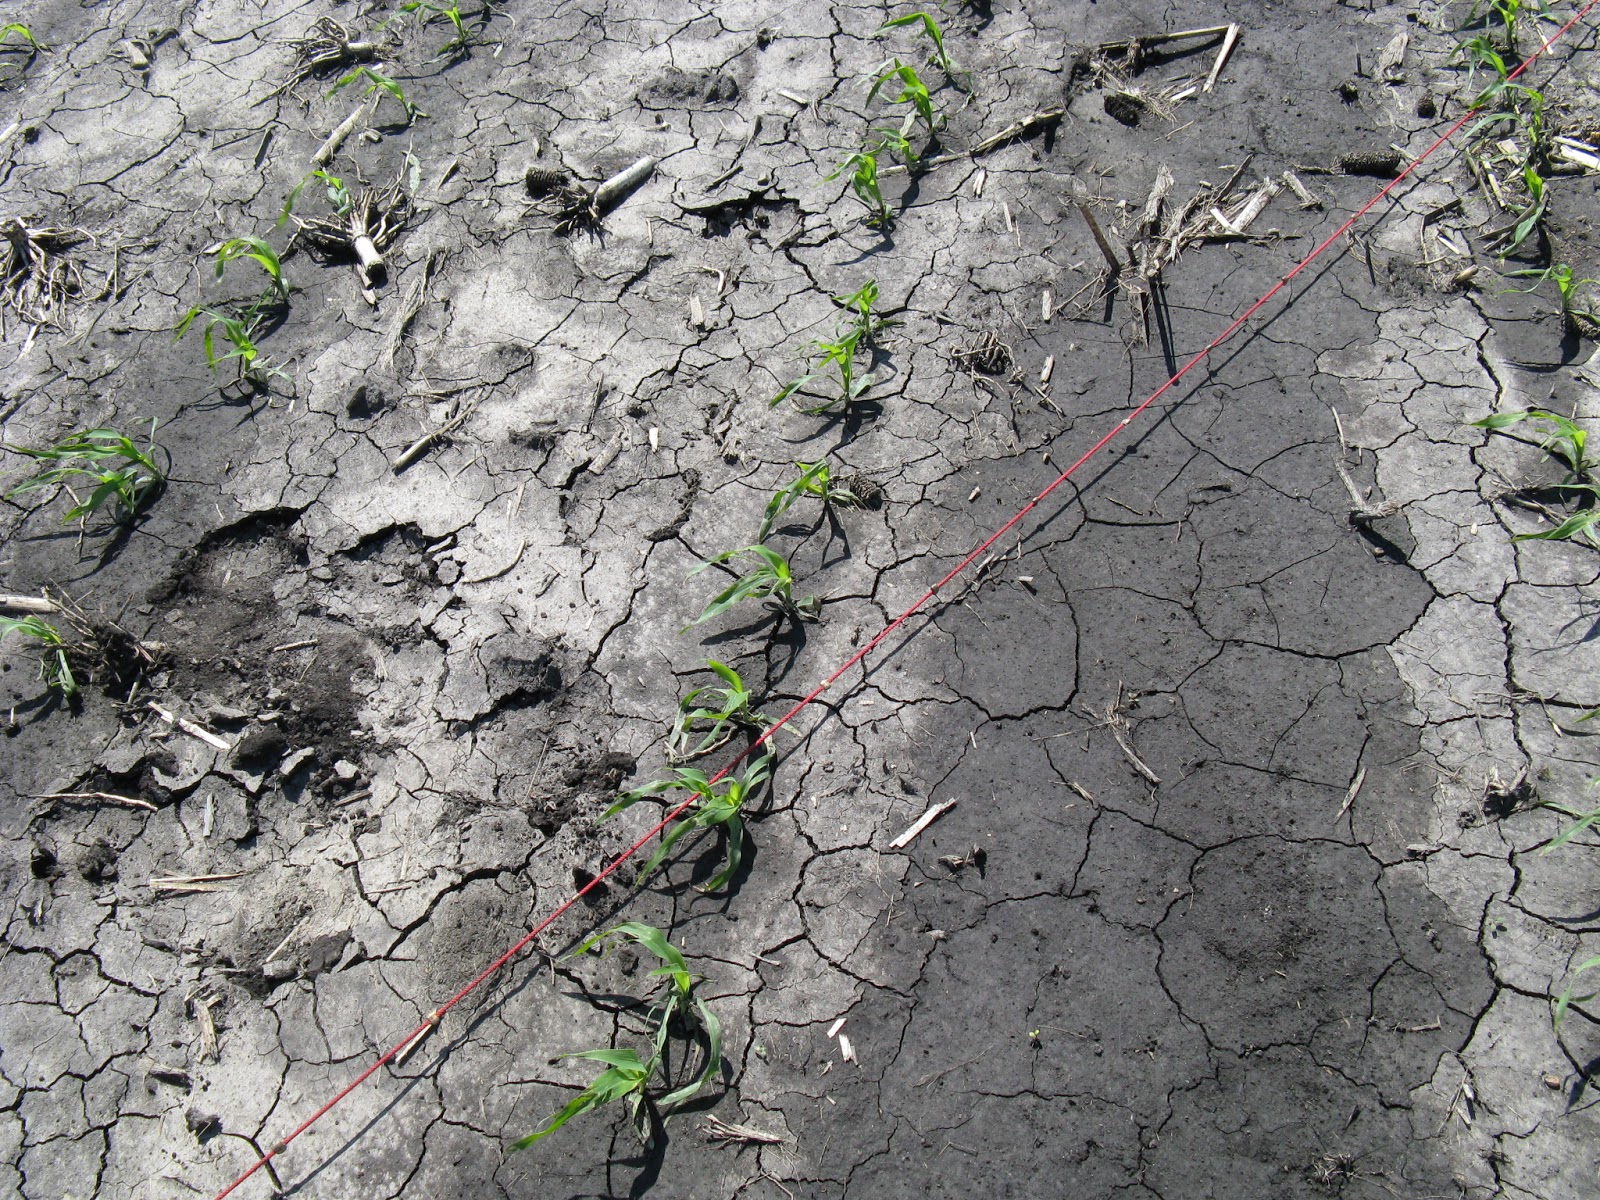 cracked soil with a few seedlings and wet areas low lying foot prints and wheel tracks.